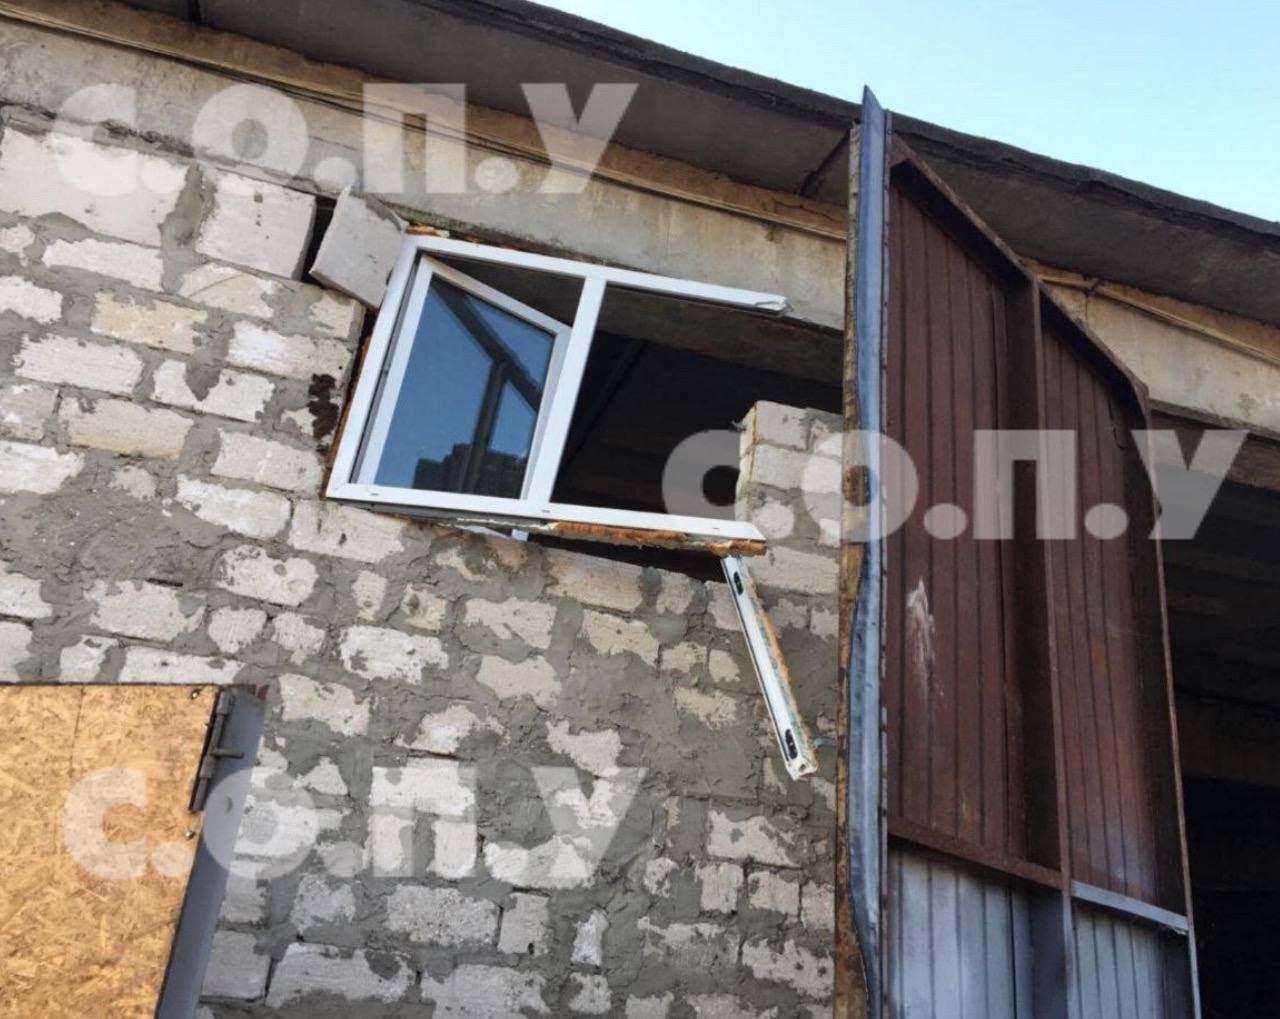 The occupants struck an agricultural enterprise in Odesa region: rescuers worked at the site. Photo